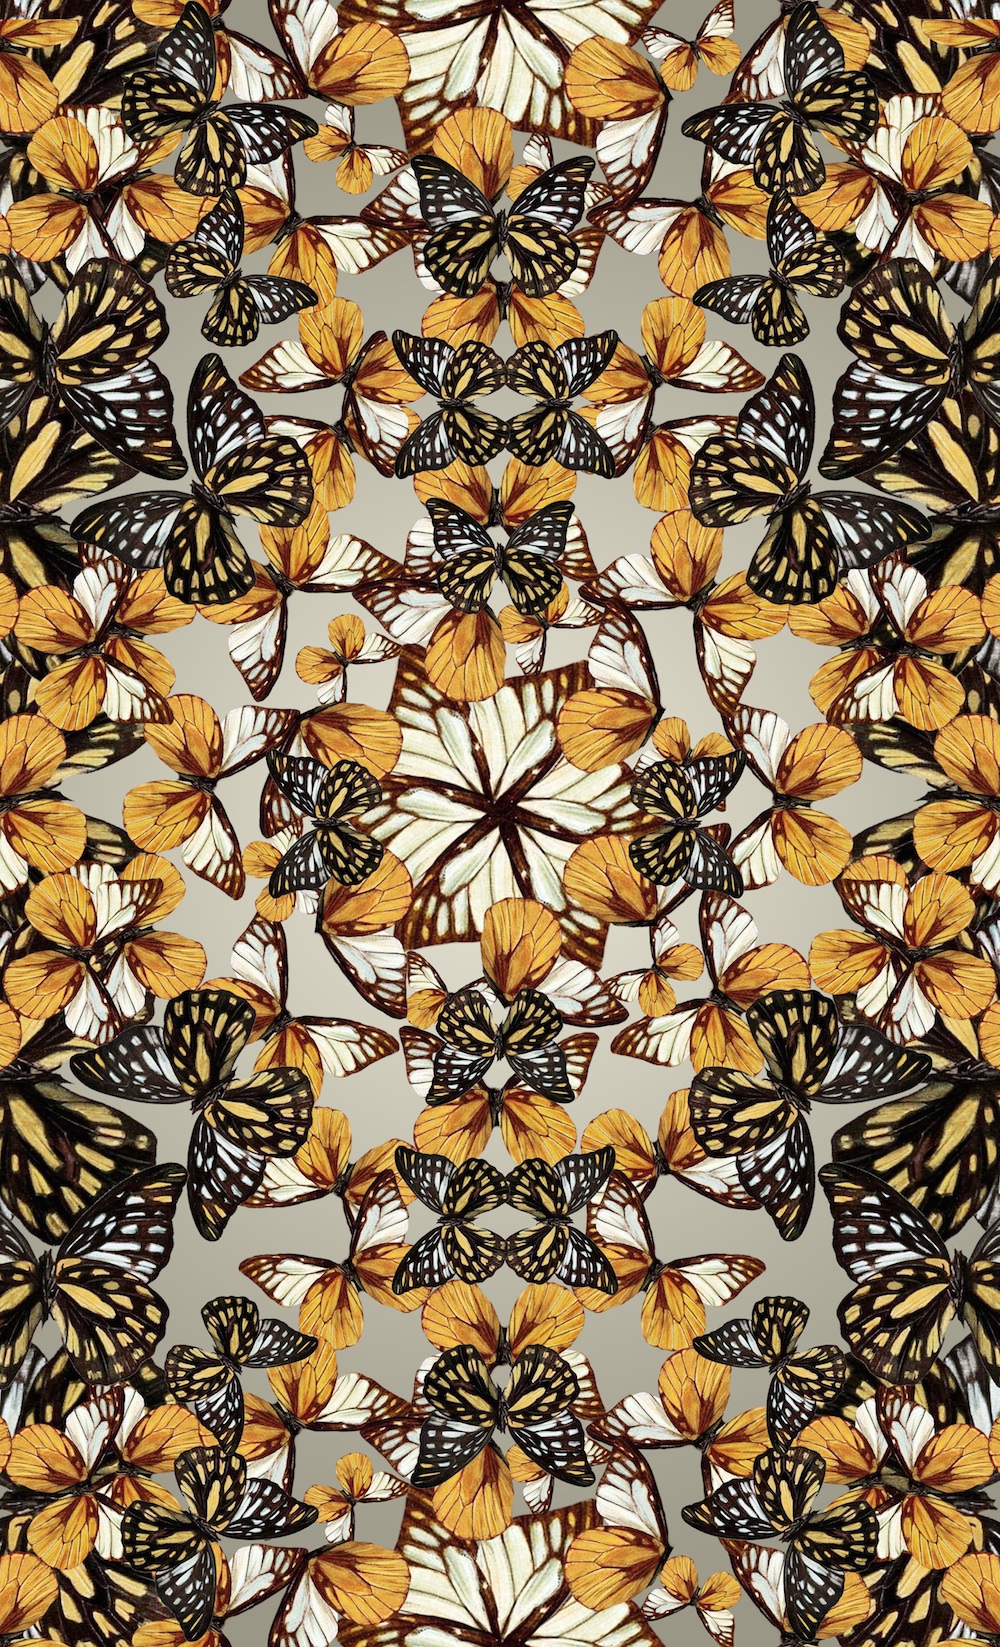 textile Nature butterfly pattern print design repeast repeat photoshop art FINEART paint collage draw color